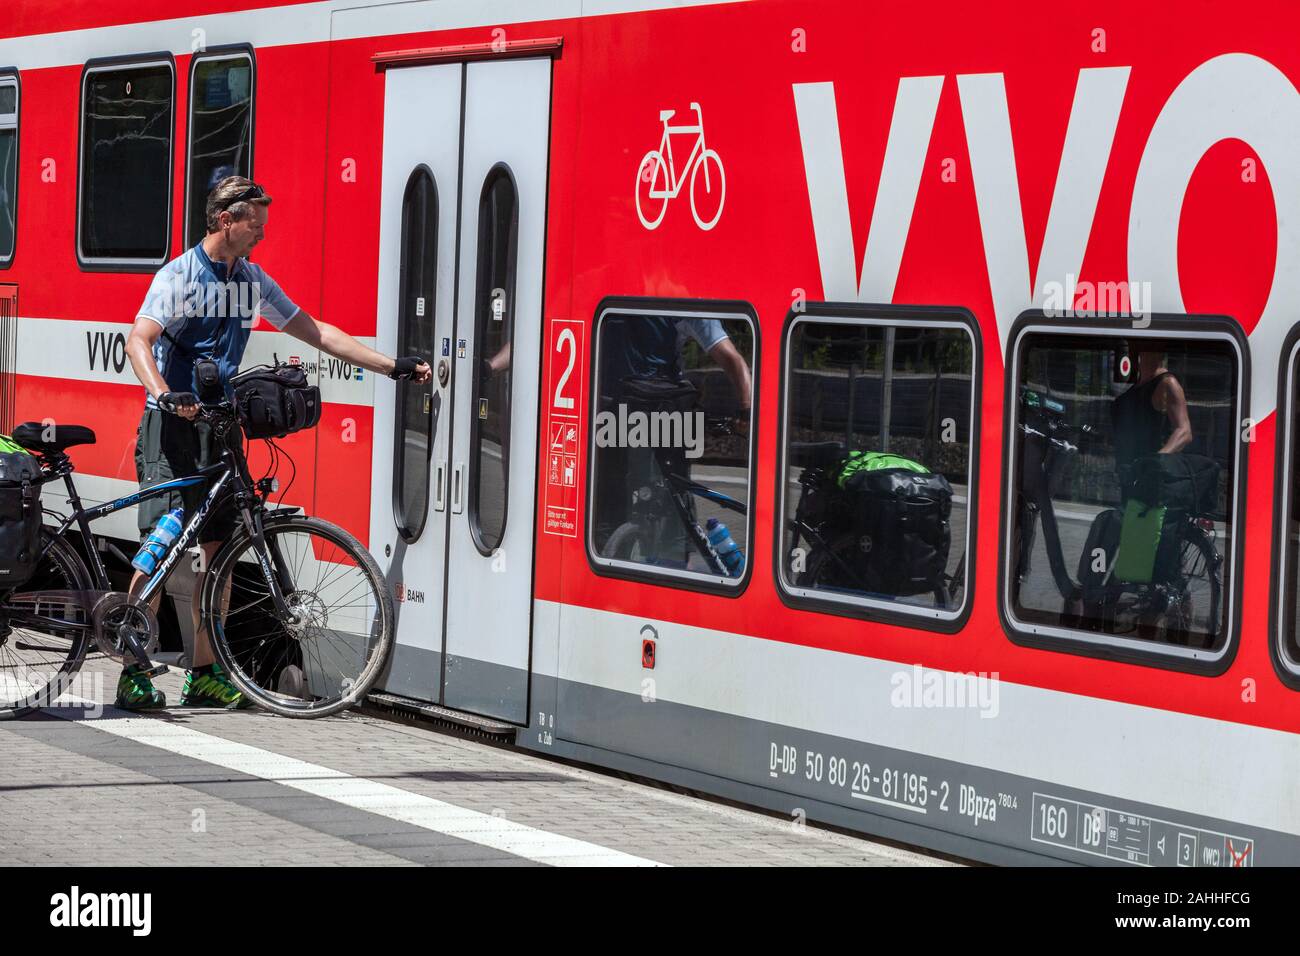 A man with a bicycle on trip is opening door to a regional train, Germany active lifestyle Stock Photo